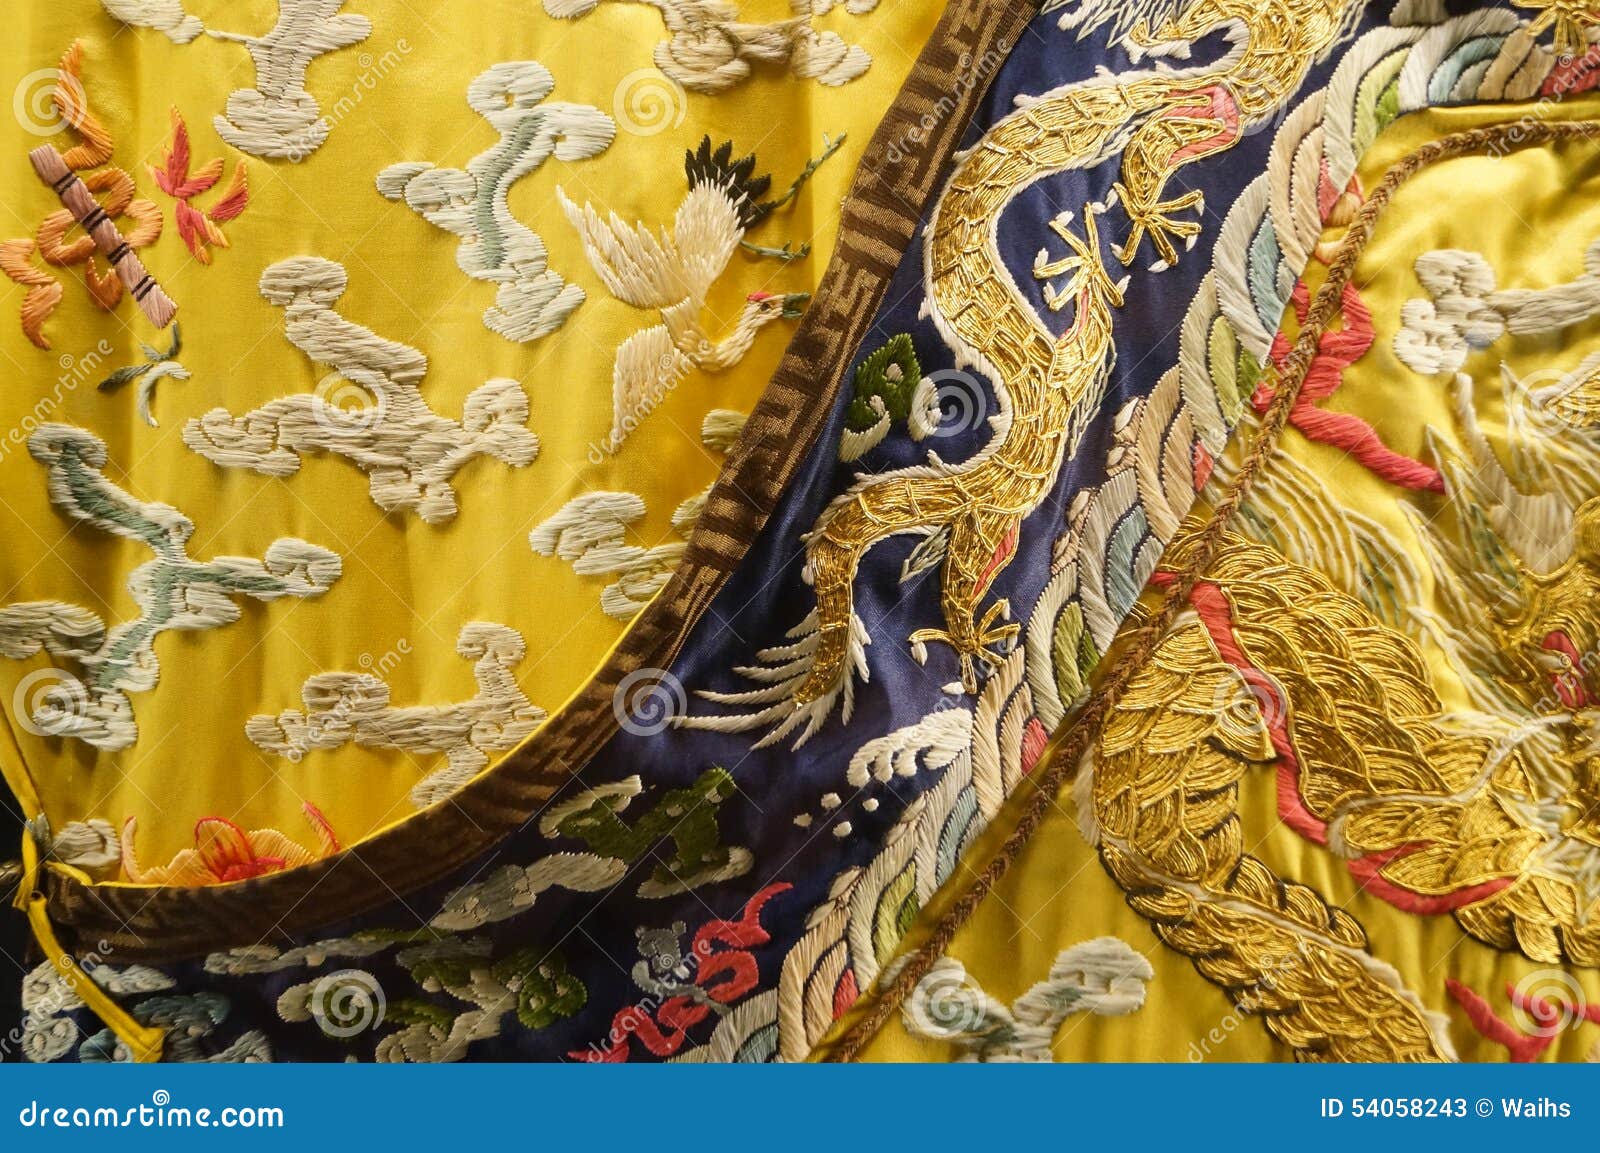 china qing dynasty imperial robes